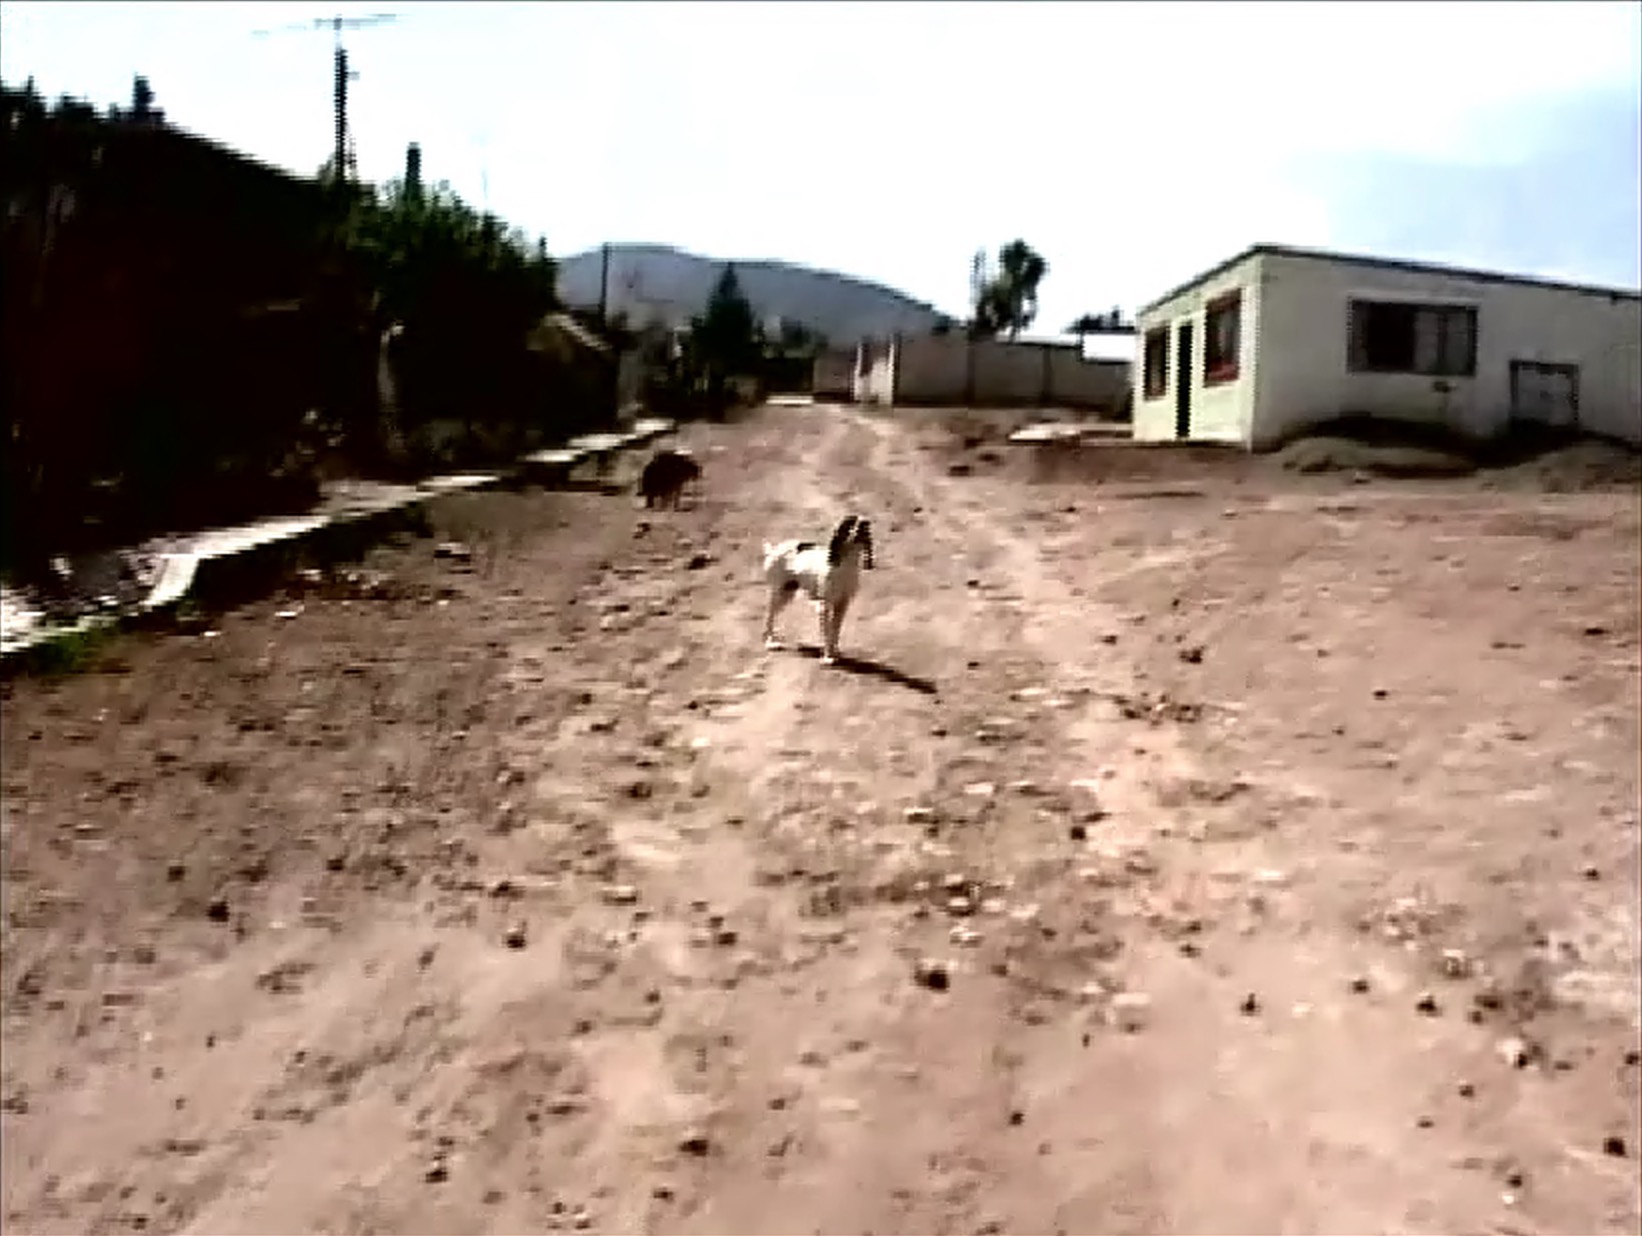 Image of artwork El Gringo, from “Point Of View: A Contemporary Anthology of the Moving Image” by Francis Alÿs